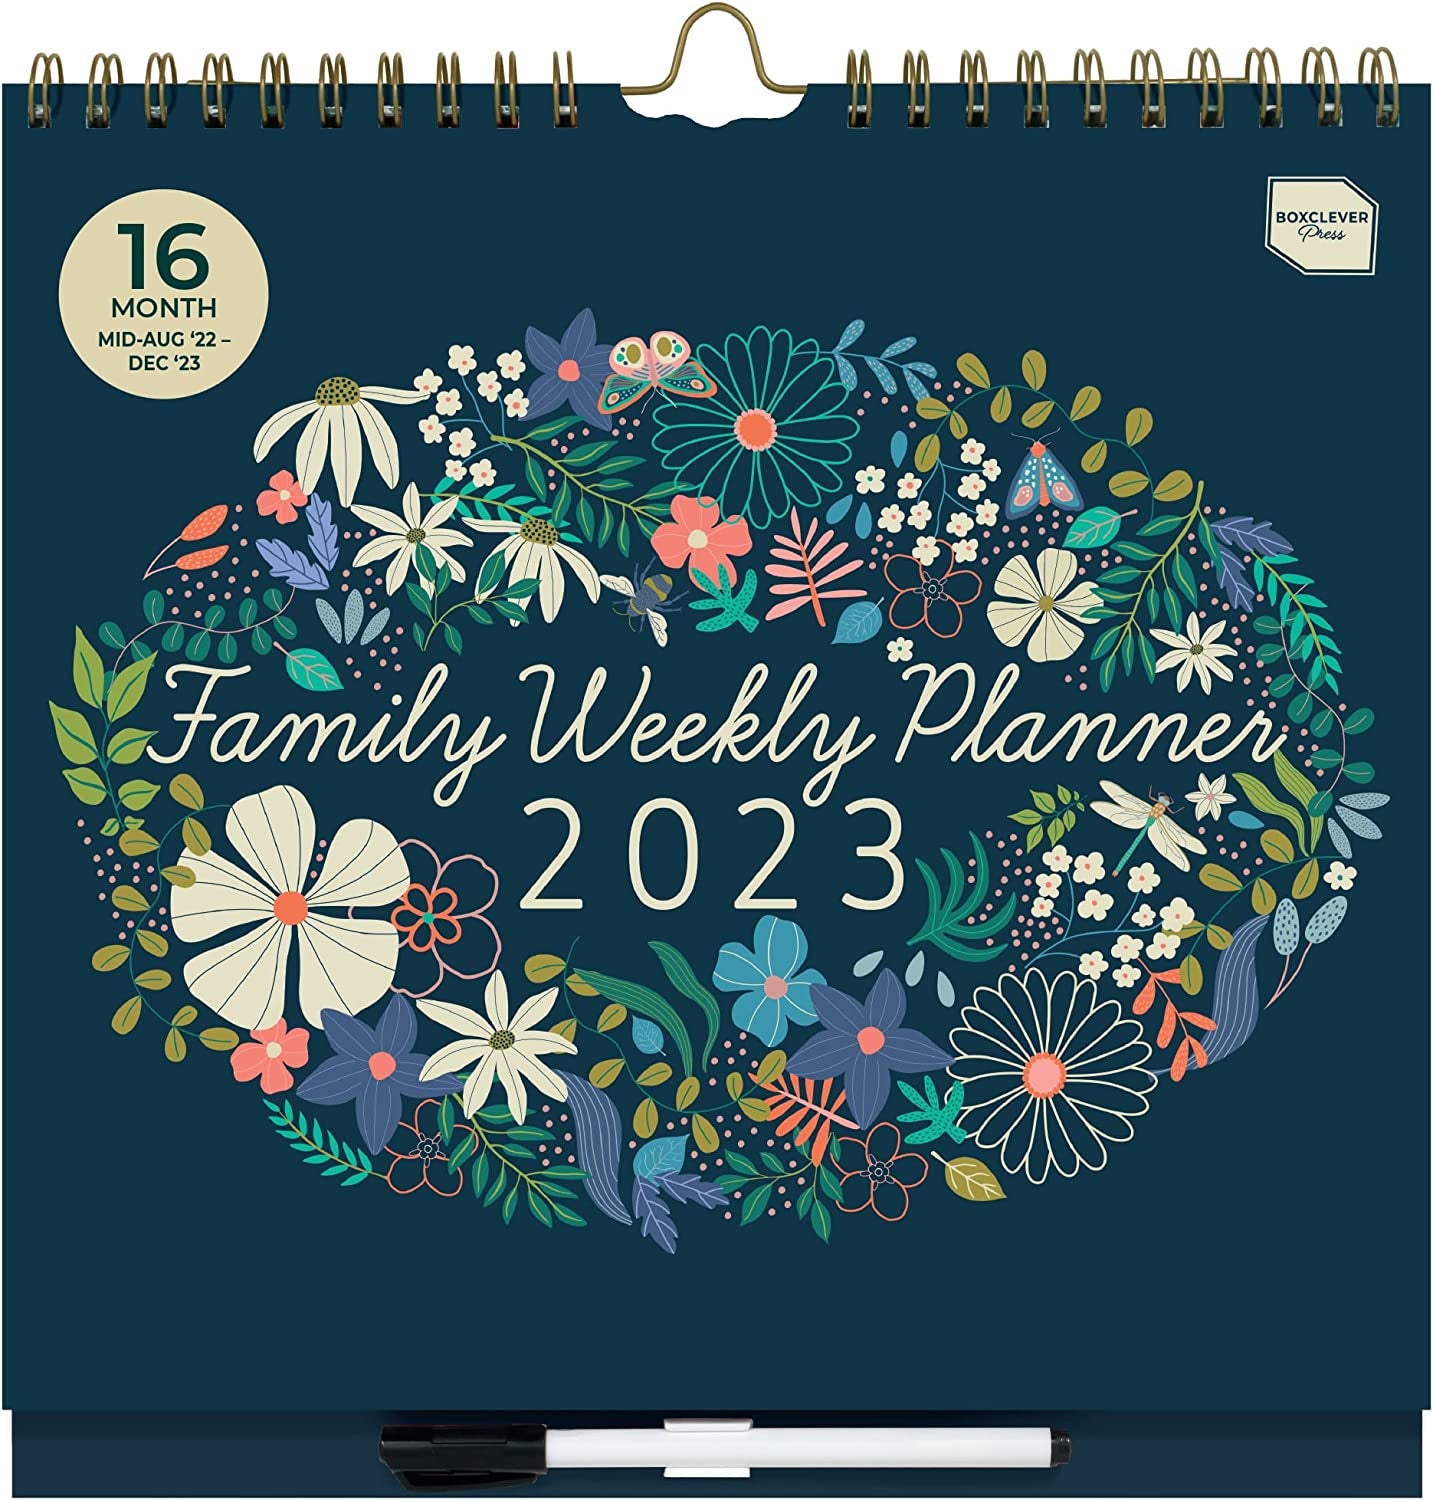 Family Weekly Planner 2022 2023. Wall Calendar 2022 2023 with 6 Columns. Family Calendar 2022 2023 Runs Mid-Aug'22 - Dec'23. 2022 2023 Calendar with Lists, Pocket & Stickers